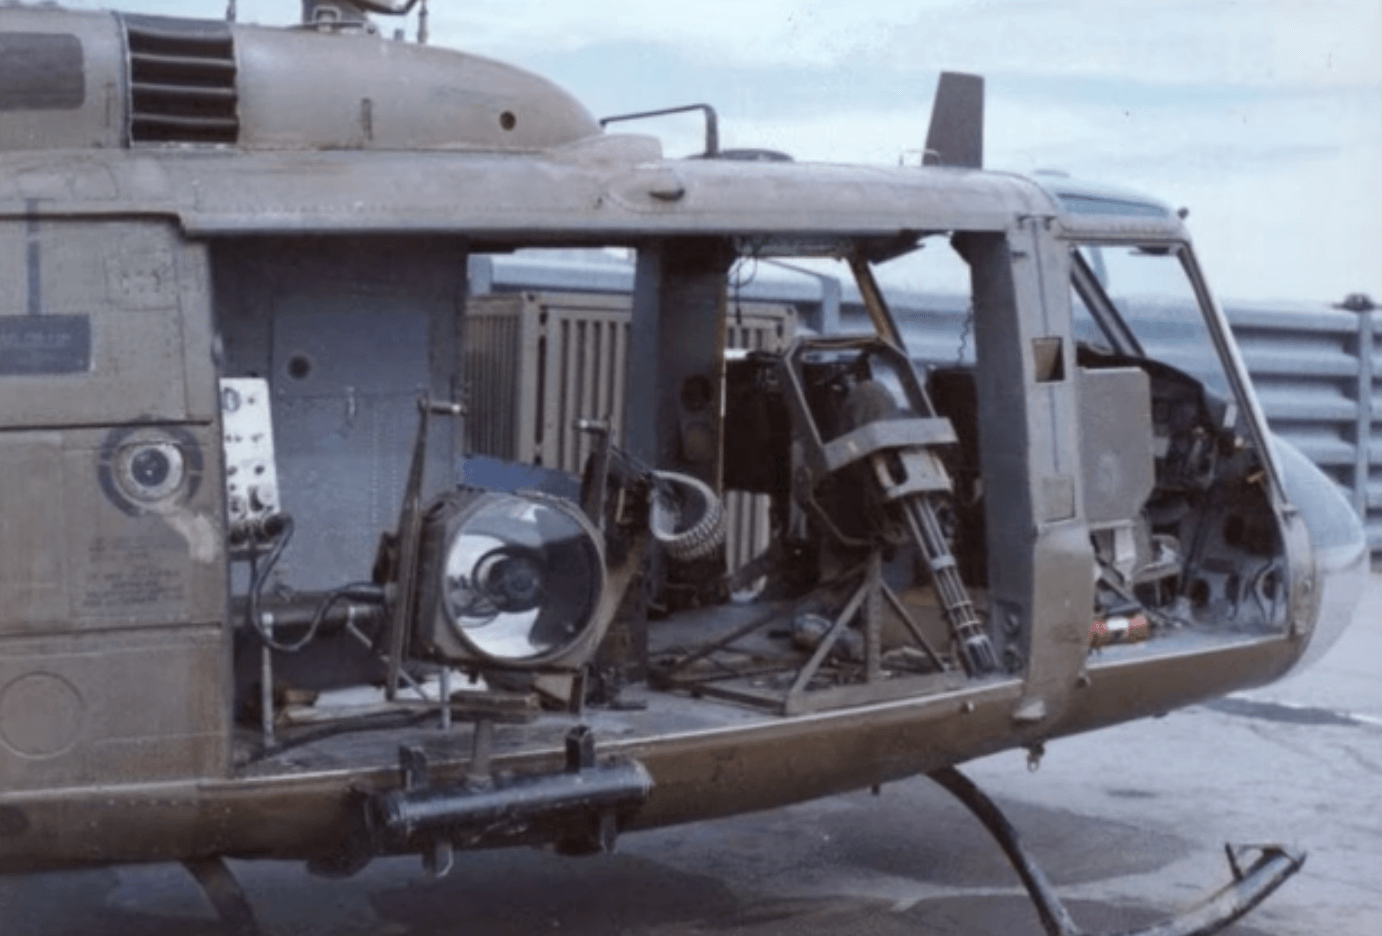 Close up of a Huey helicopter.